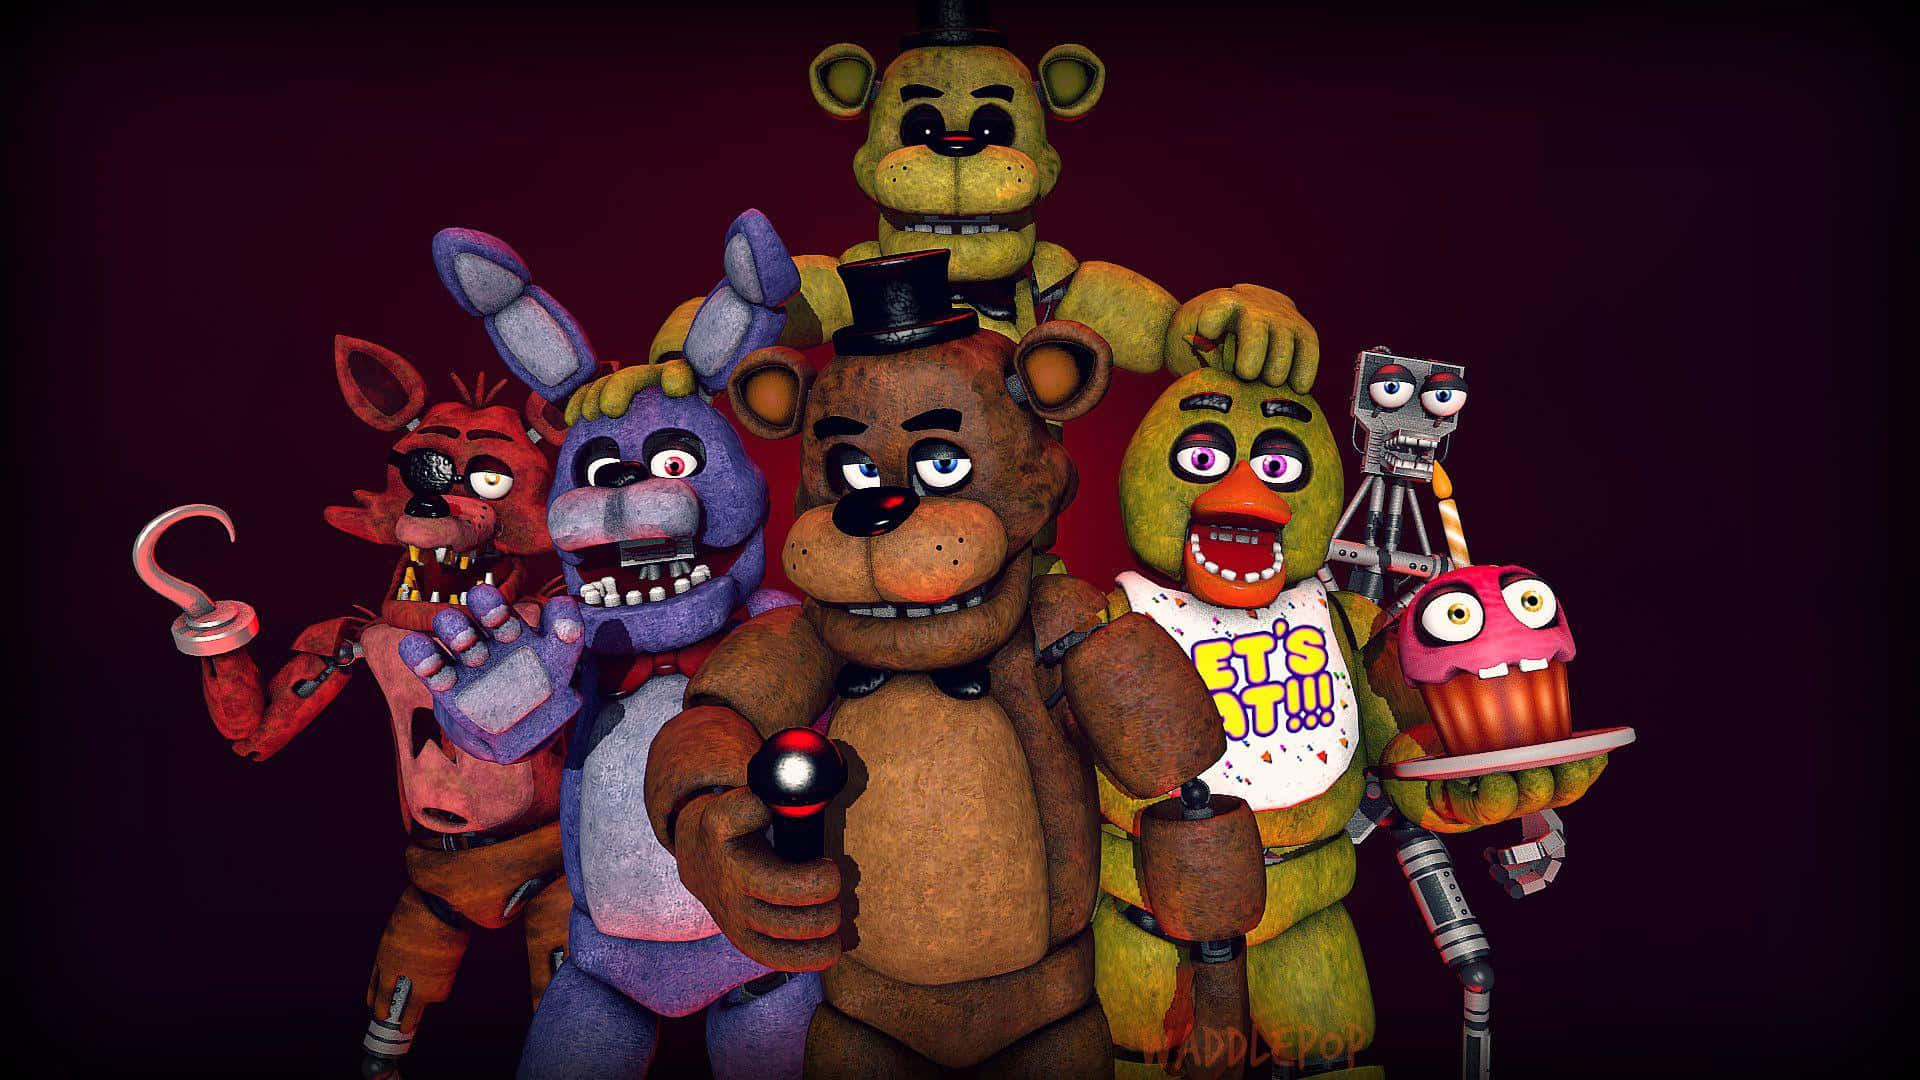 Video Game Five Nights At Freddy's 2 4k Ultra HD Wallpaper